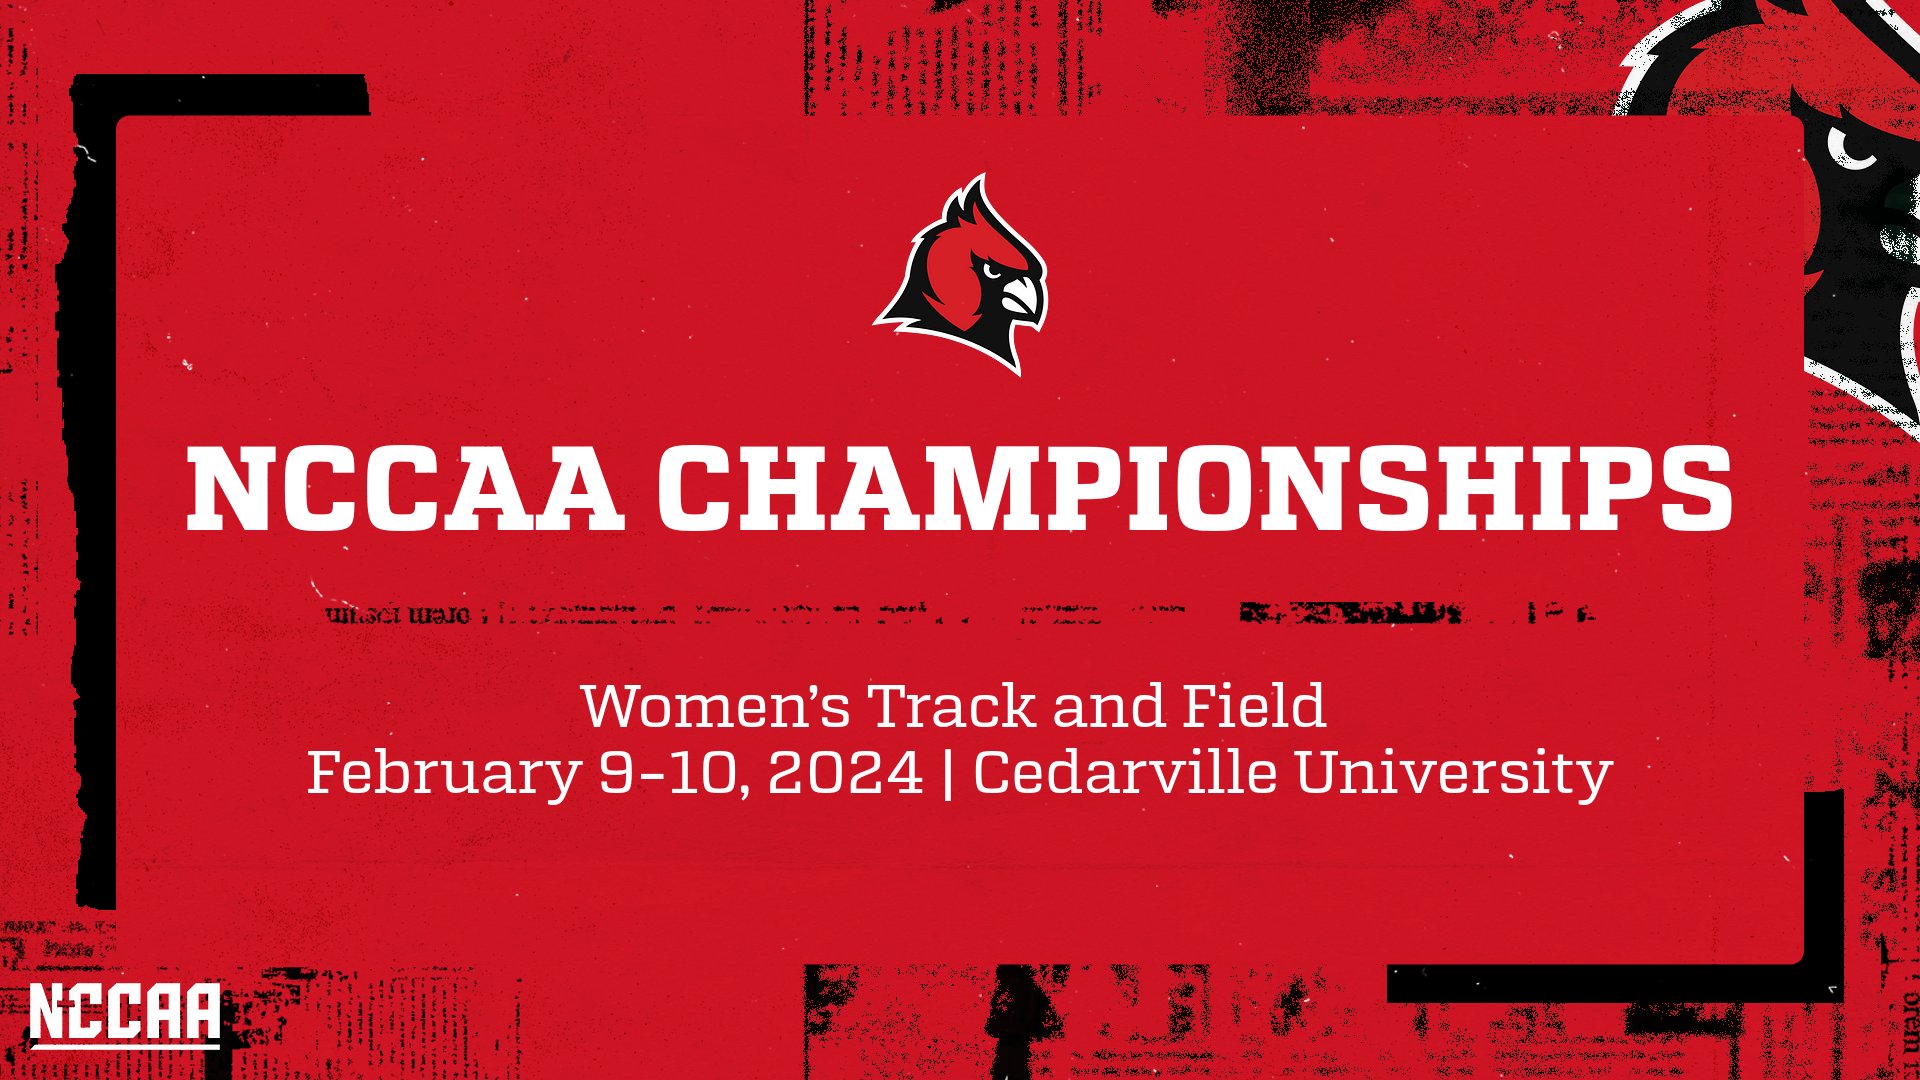 NCCAA CHAMPIONSHIPS PREVIEW: Women's Track and Field set to compete at the NCCAA Championships